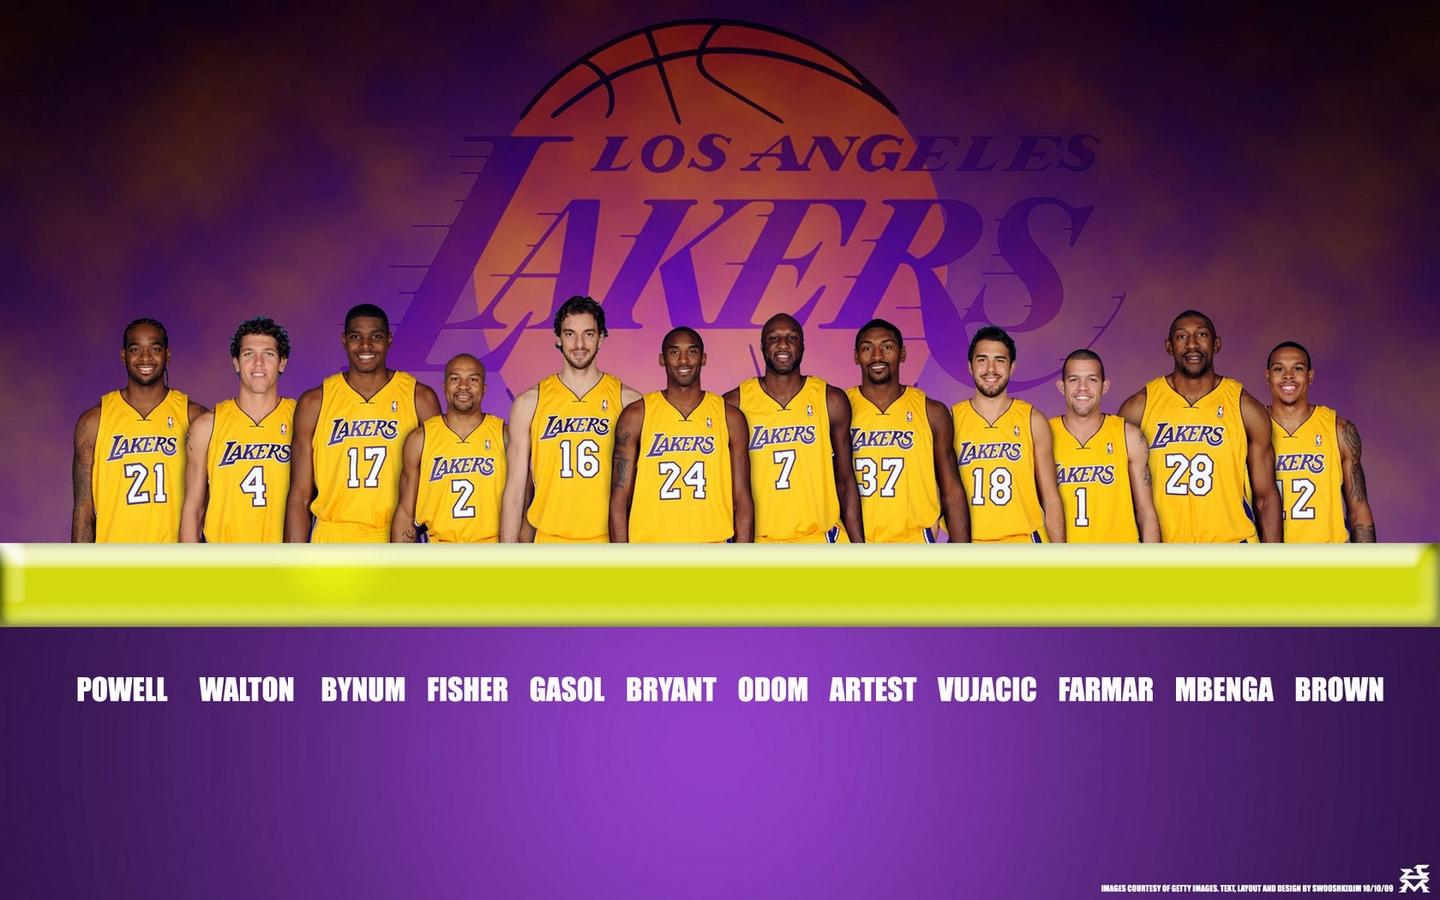 Download wallpaper 1440x900 team, players, lakers